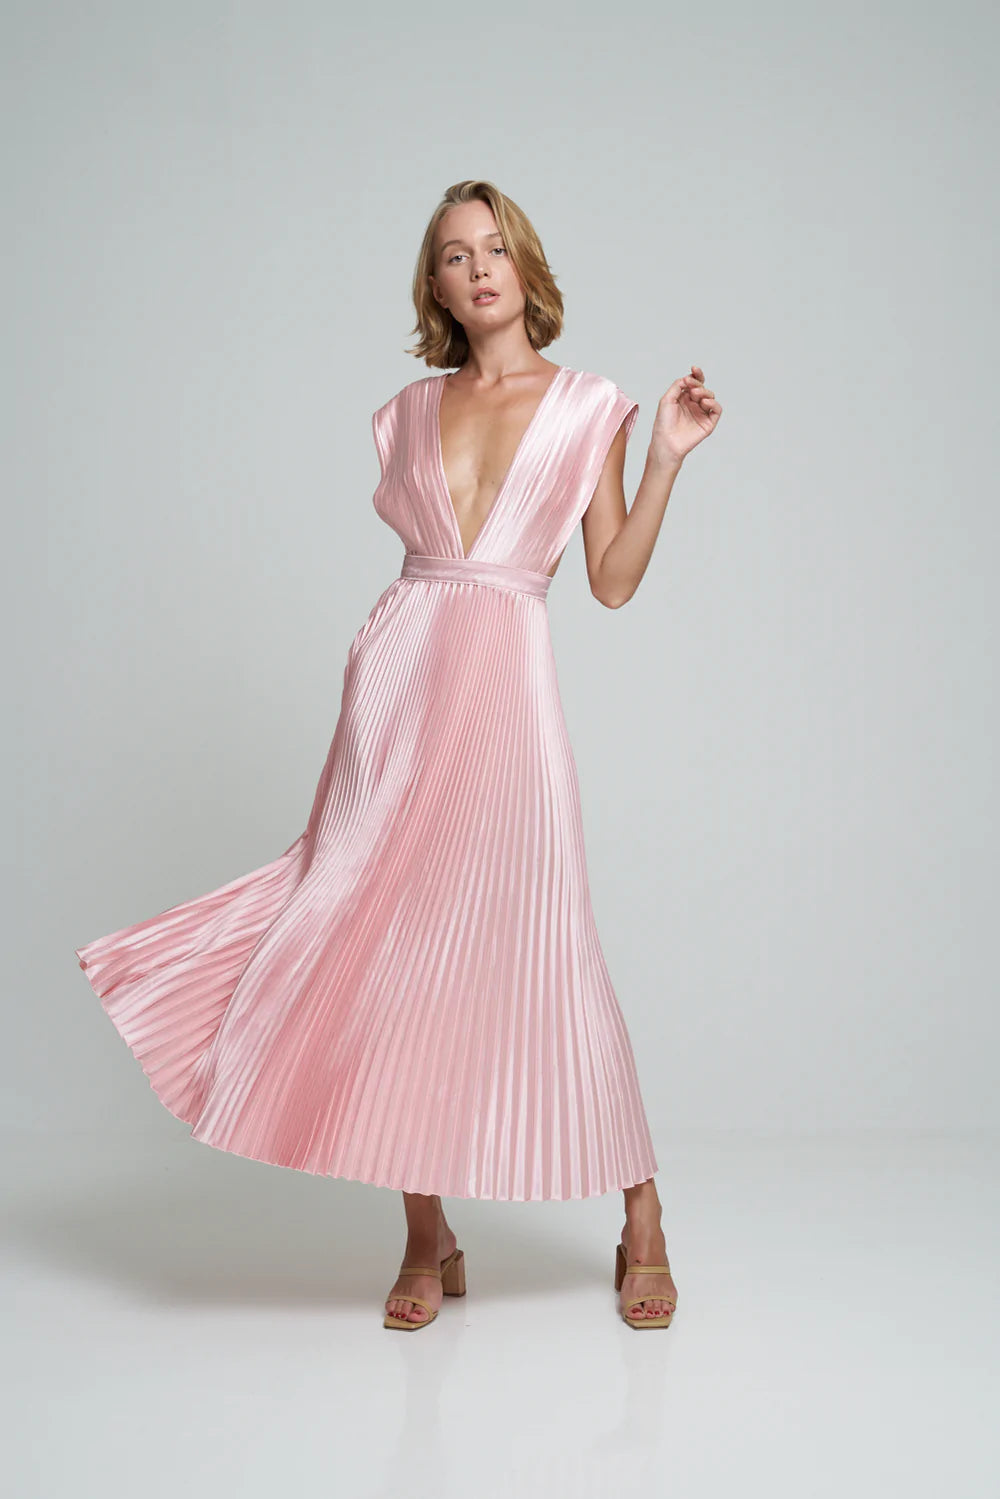 L'IDEE Gala Gown in Ballet Pink